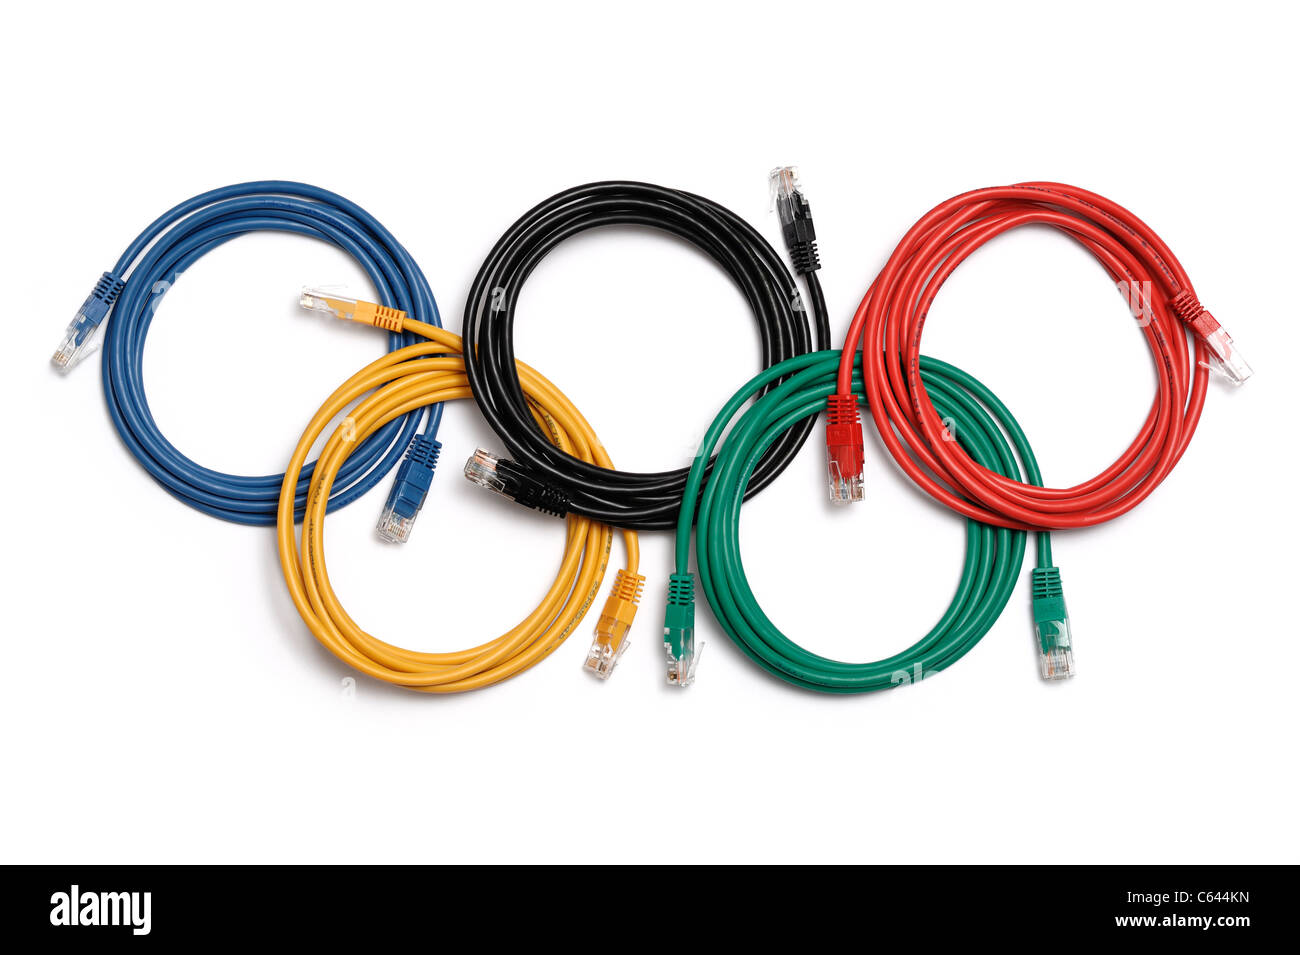 Olympic rings and computer cables Stock Photo